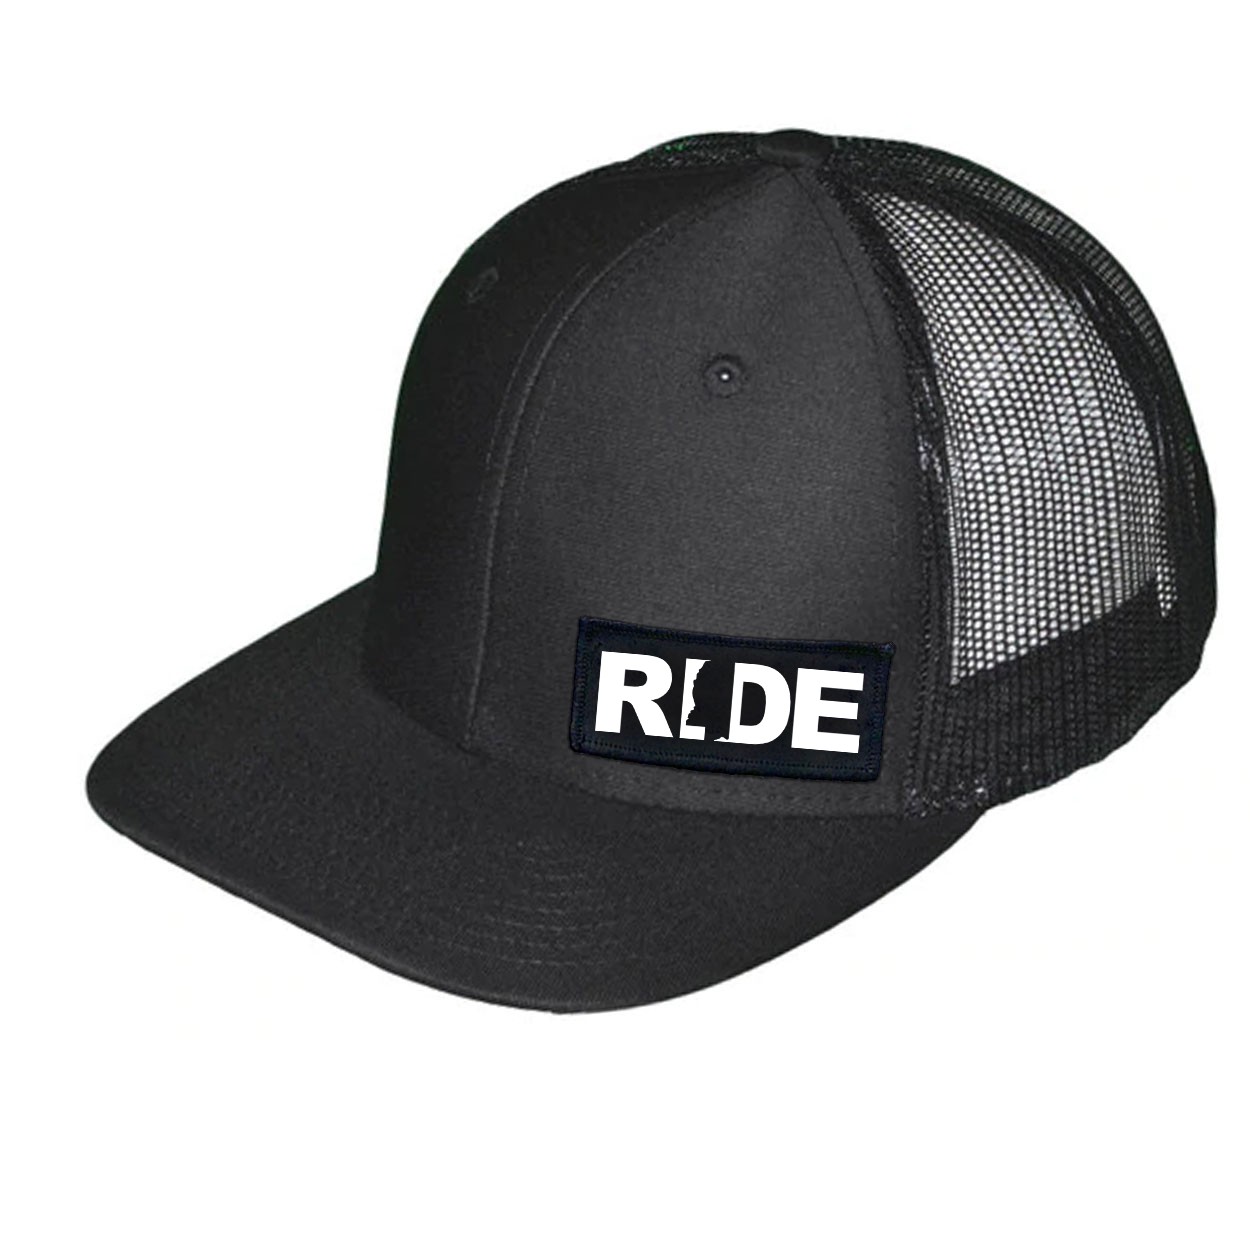 Ride Mississippi Night Out Woven Patch Snapback Trucker Hat Black (White Logo)